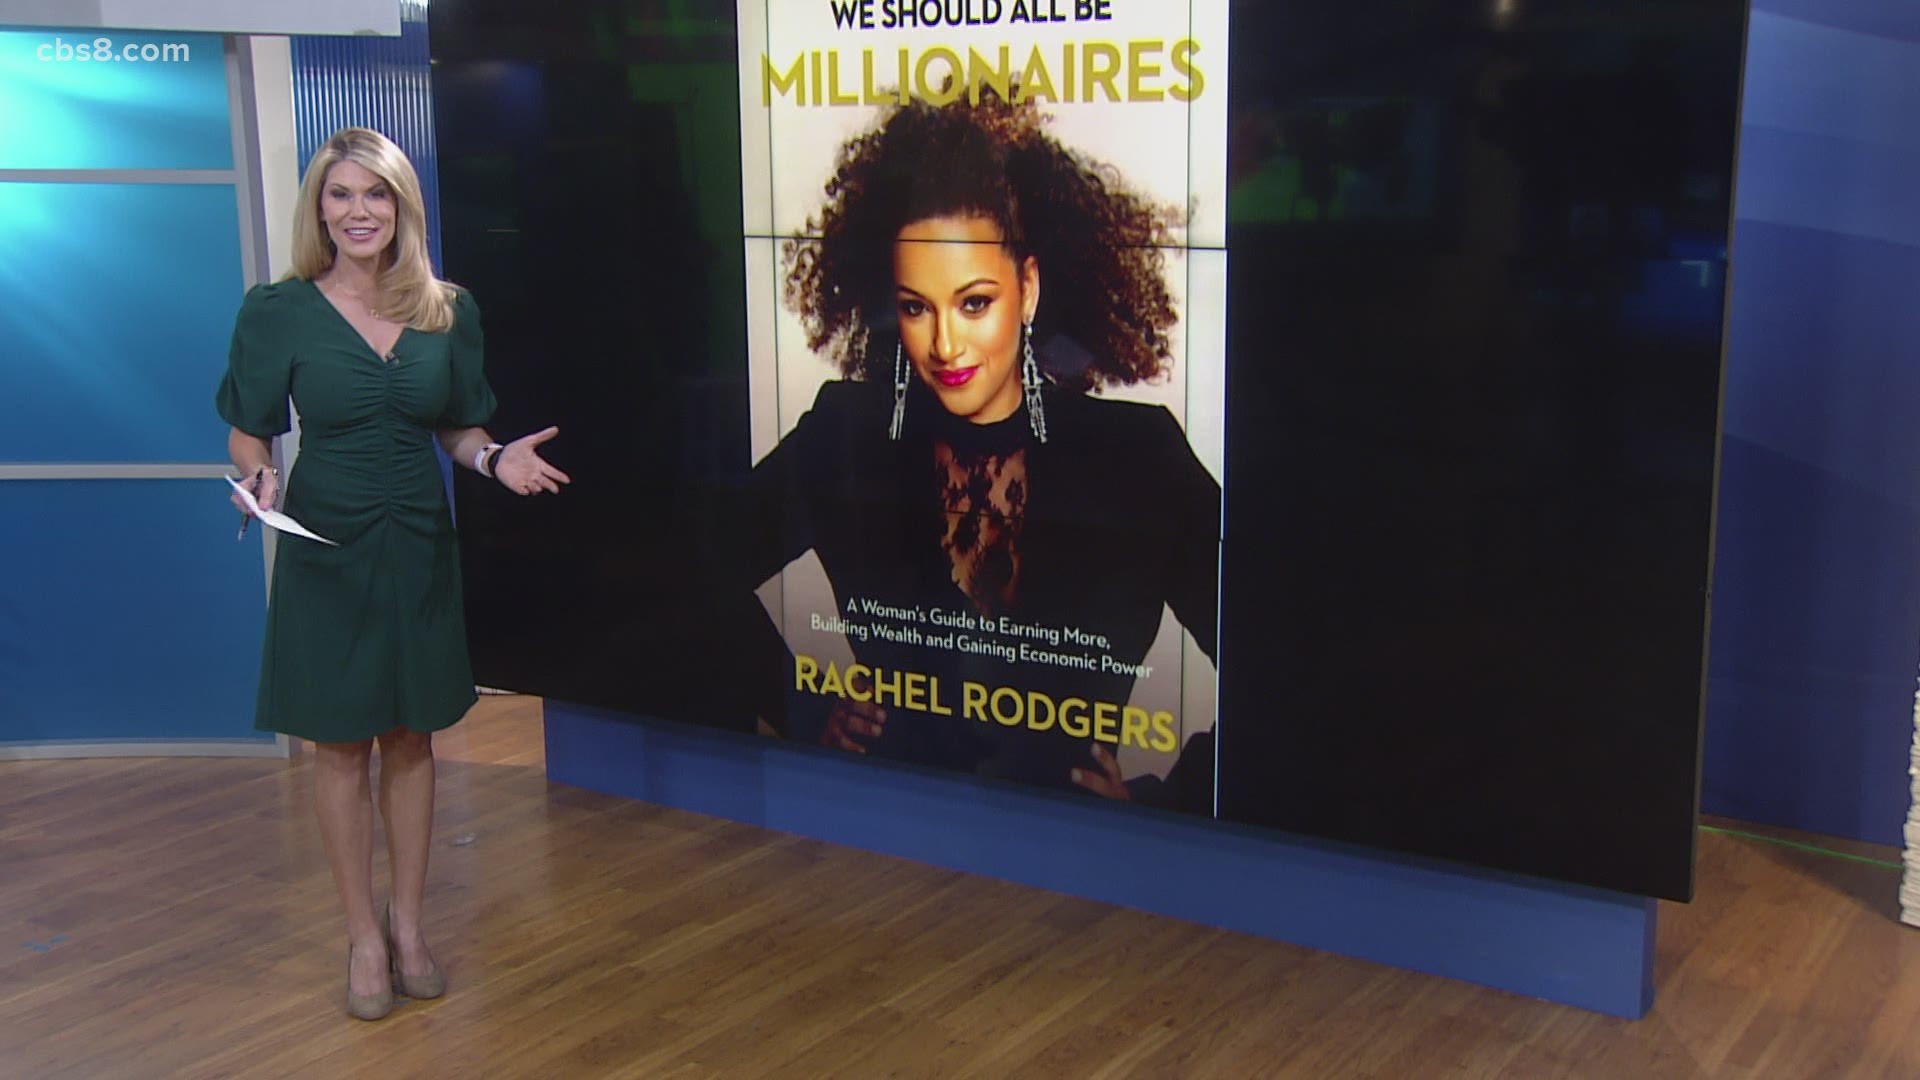 Rachel says the key step is really believing you can make millions of dollars.